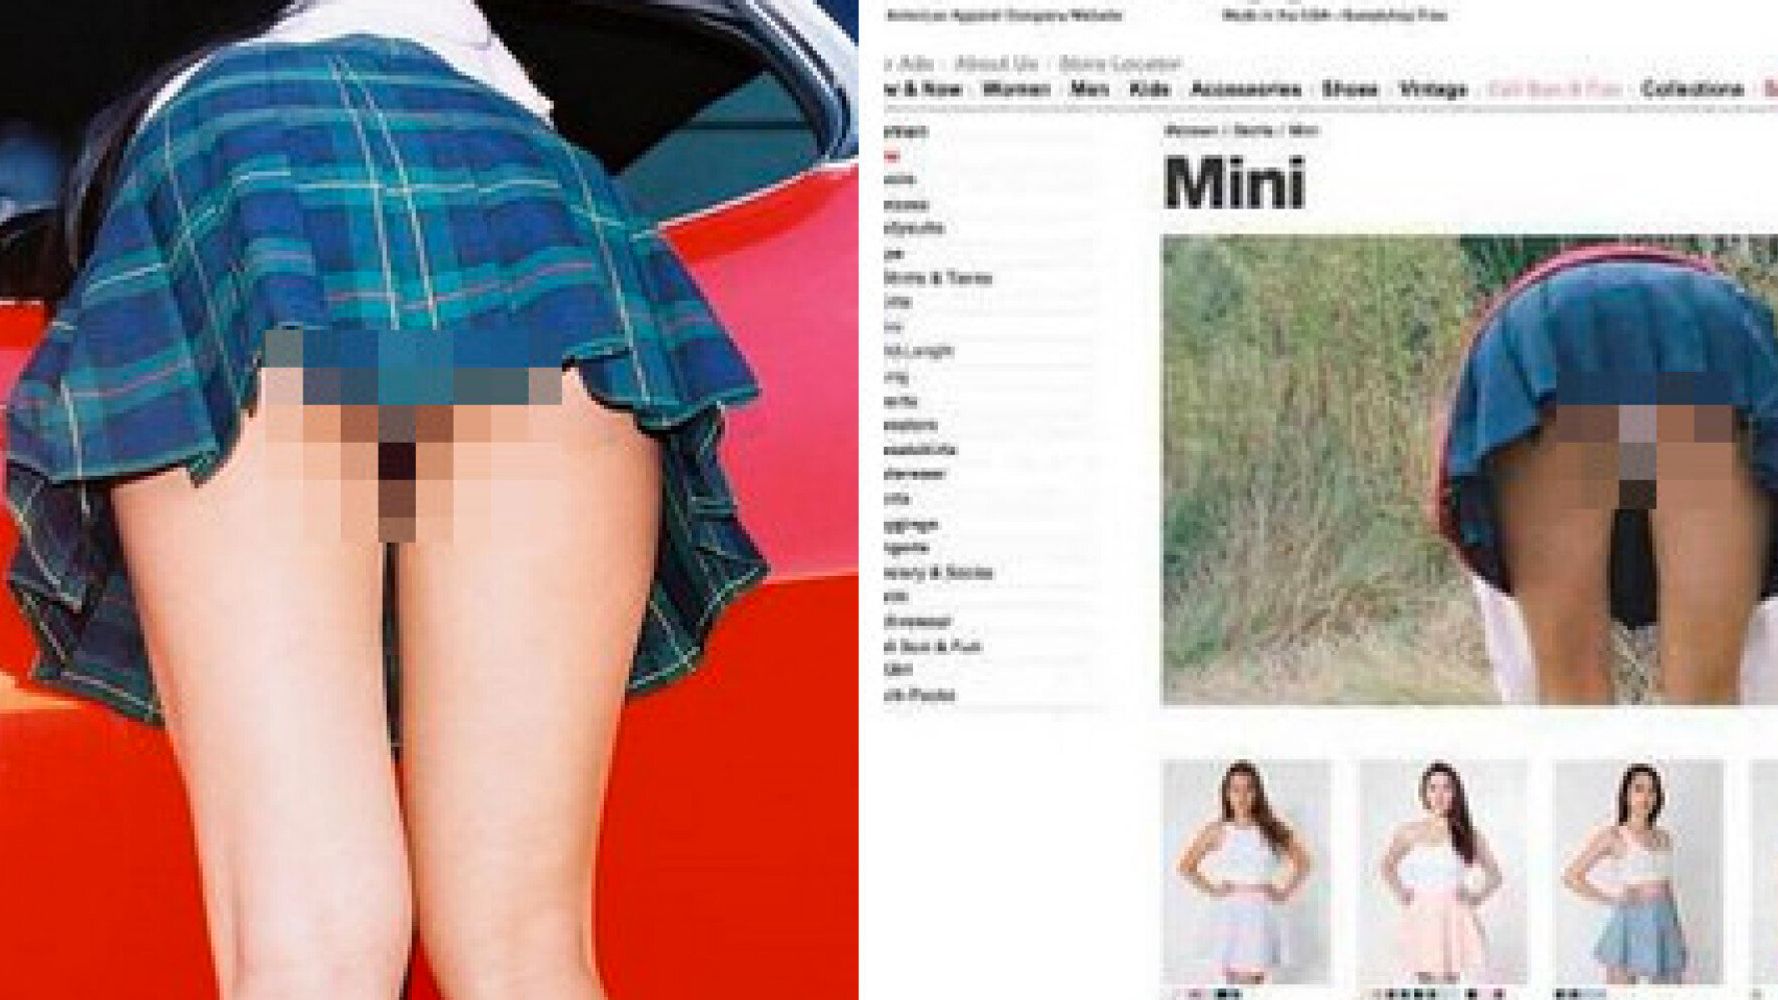 Sexy School Picture - American Apparel 'Sexy School Girl' Skirt Image Labelled 'Underaged Porn'  By The Public | HuffPost UK Life